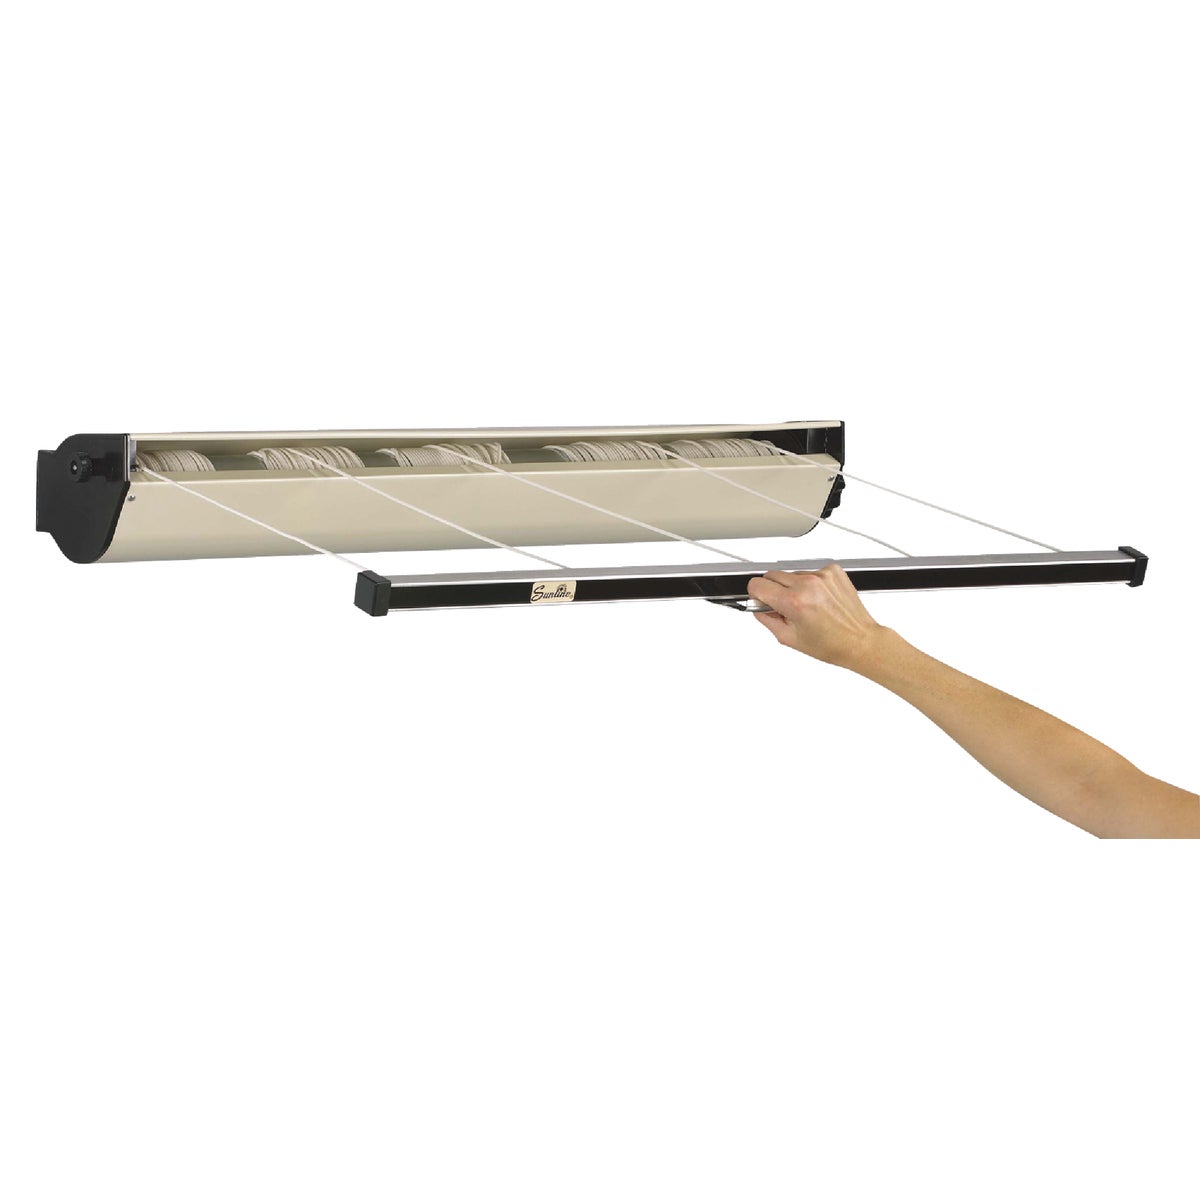 Item 644978, Retractable clothesline featuring lightweight and heavy-duty construction, 